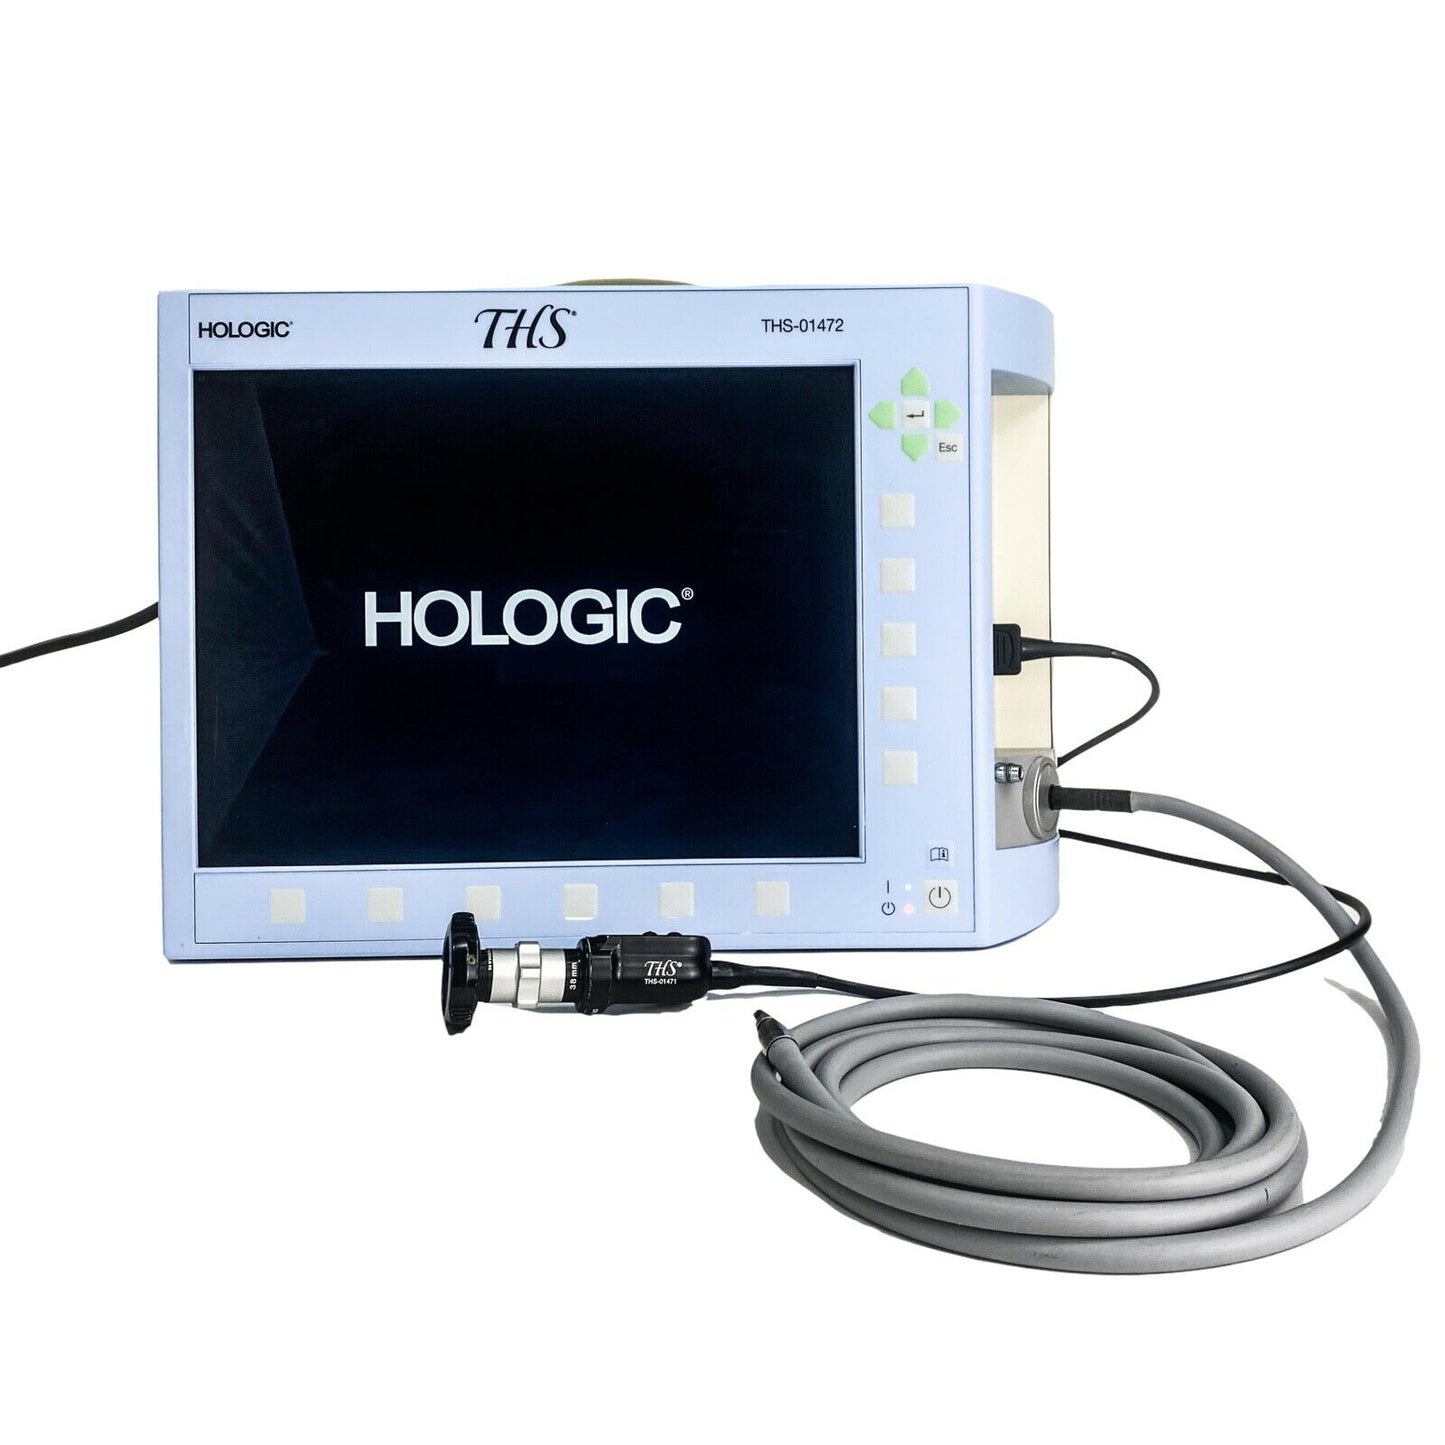 HOLOGIC THS-01472 Hysteroscope Video System - All in 1 - Camera, Light Source